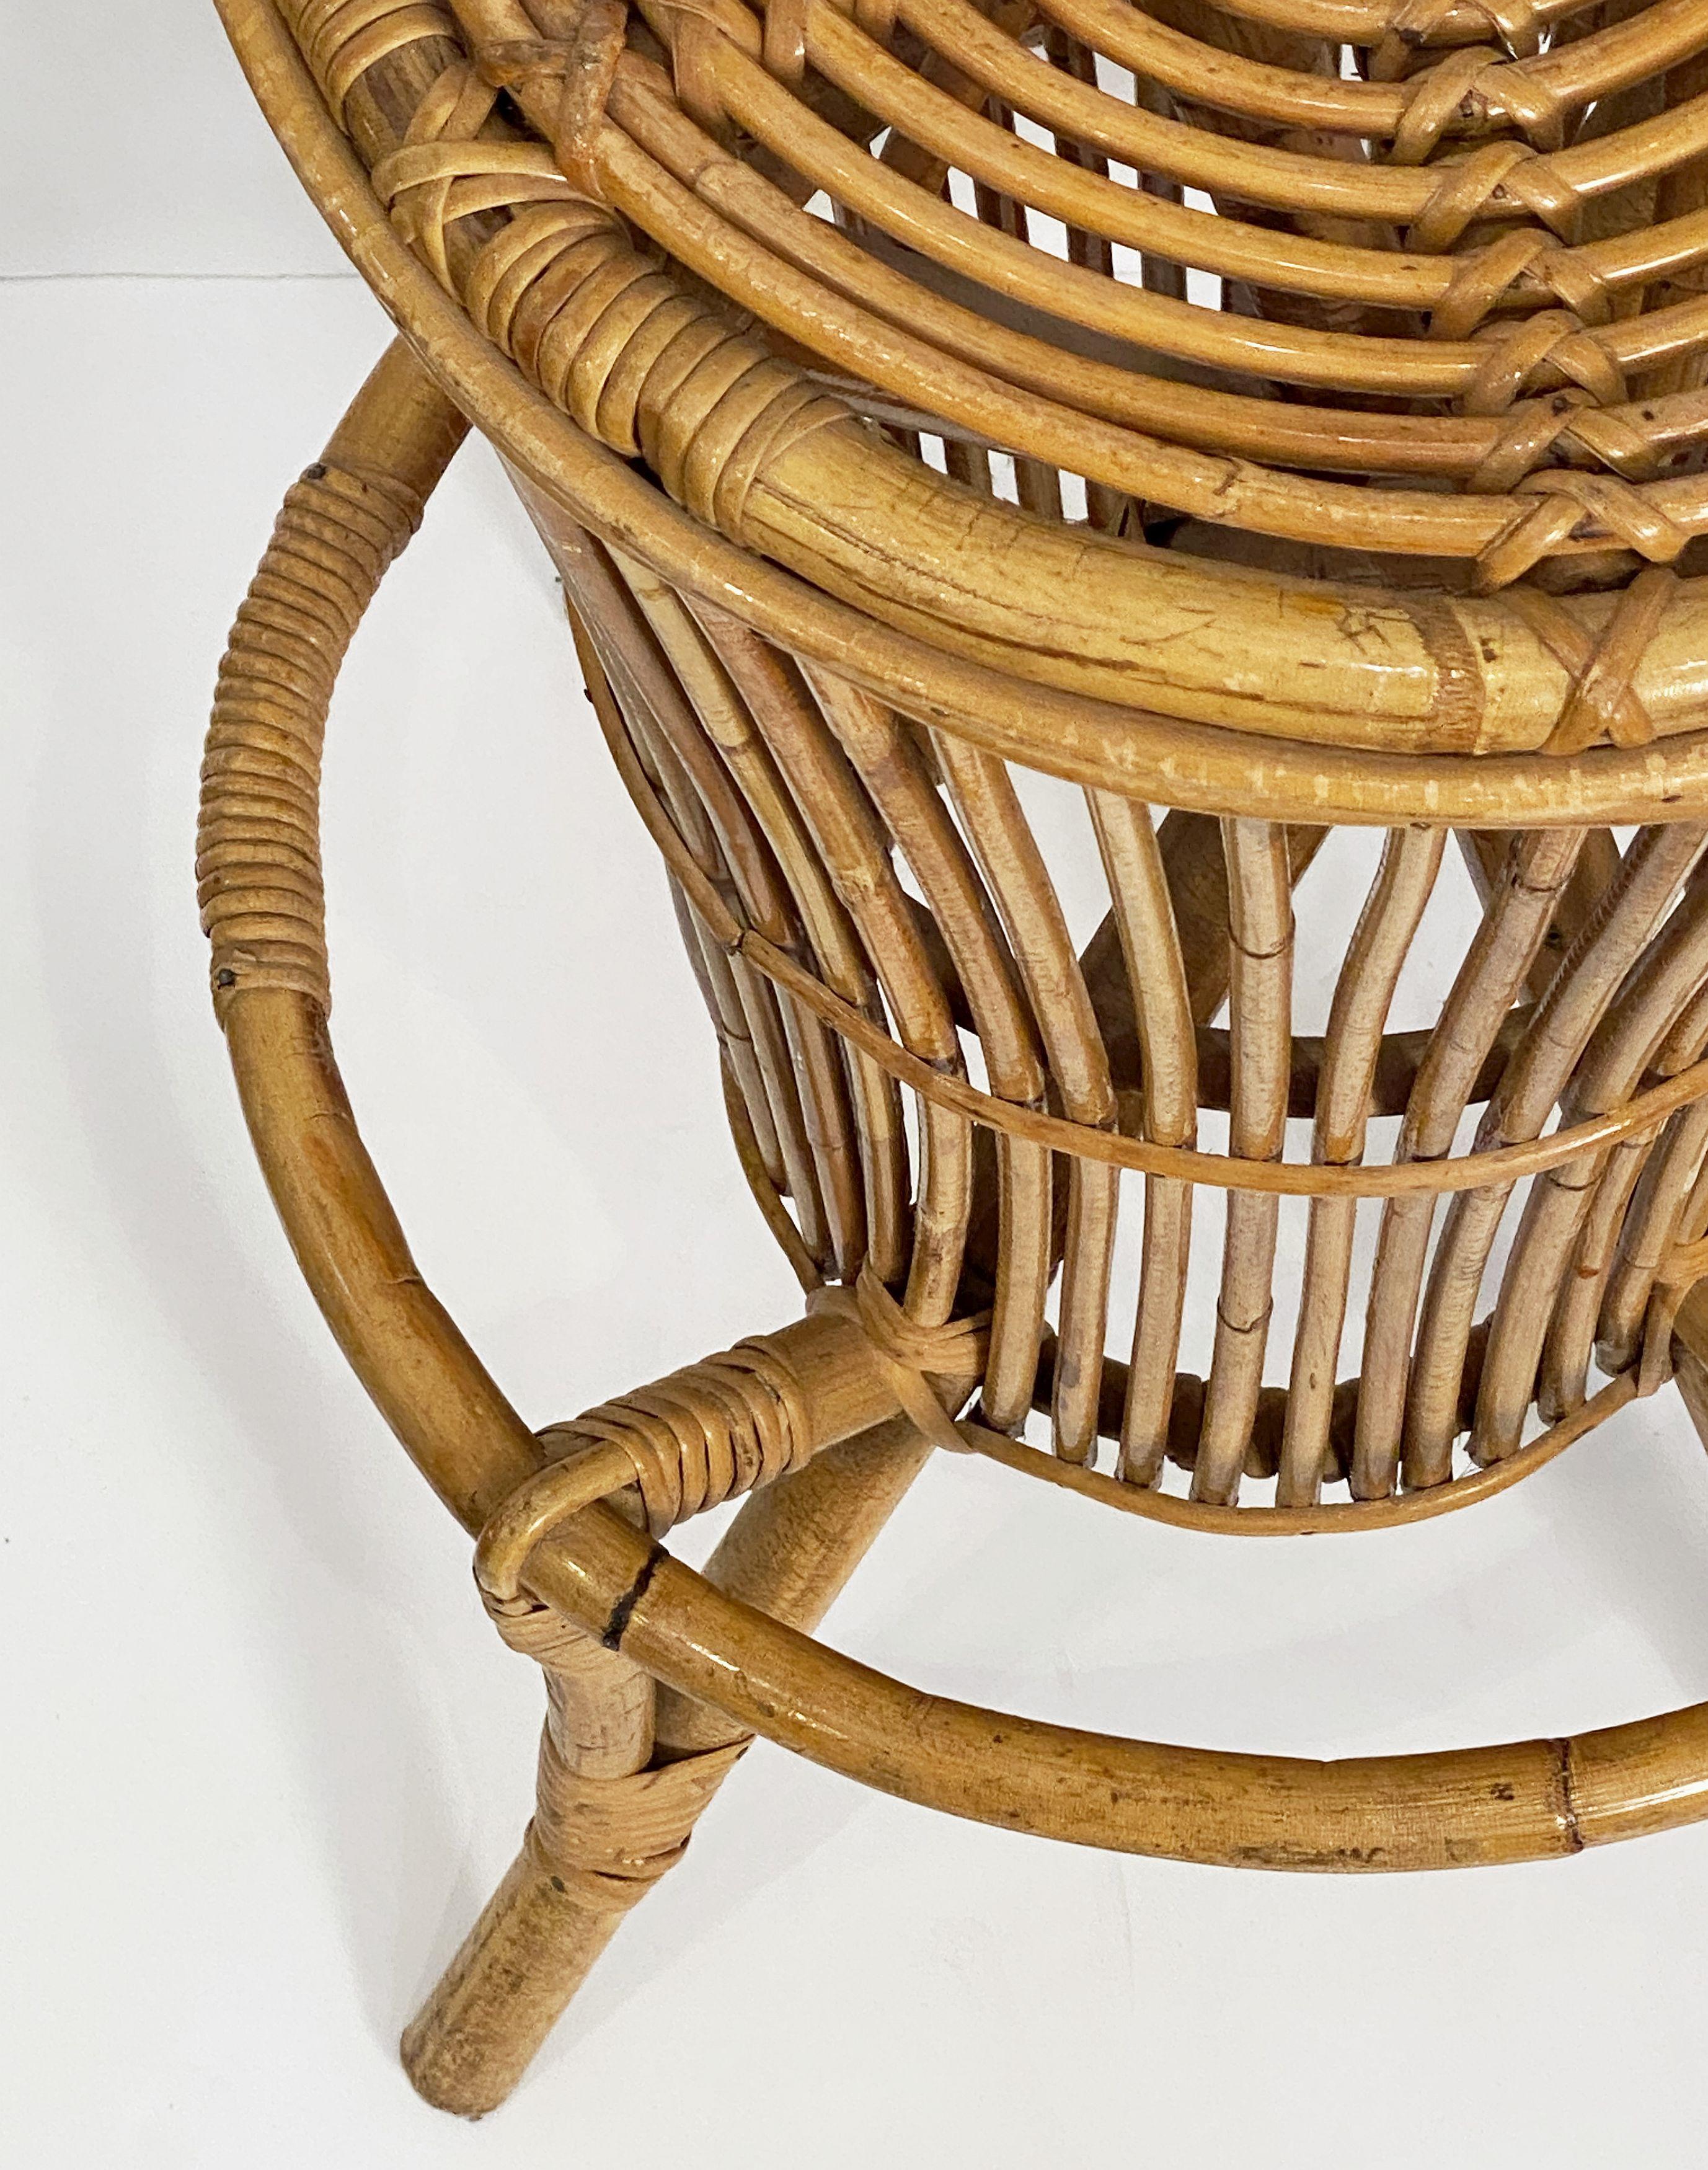 Italian Stool of Rattan and Bamboo from the Mid-20th Century For Sale 12